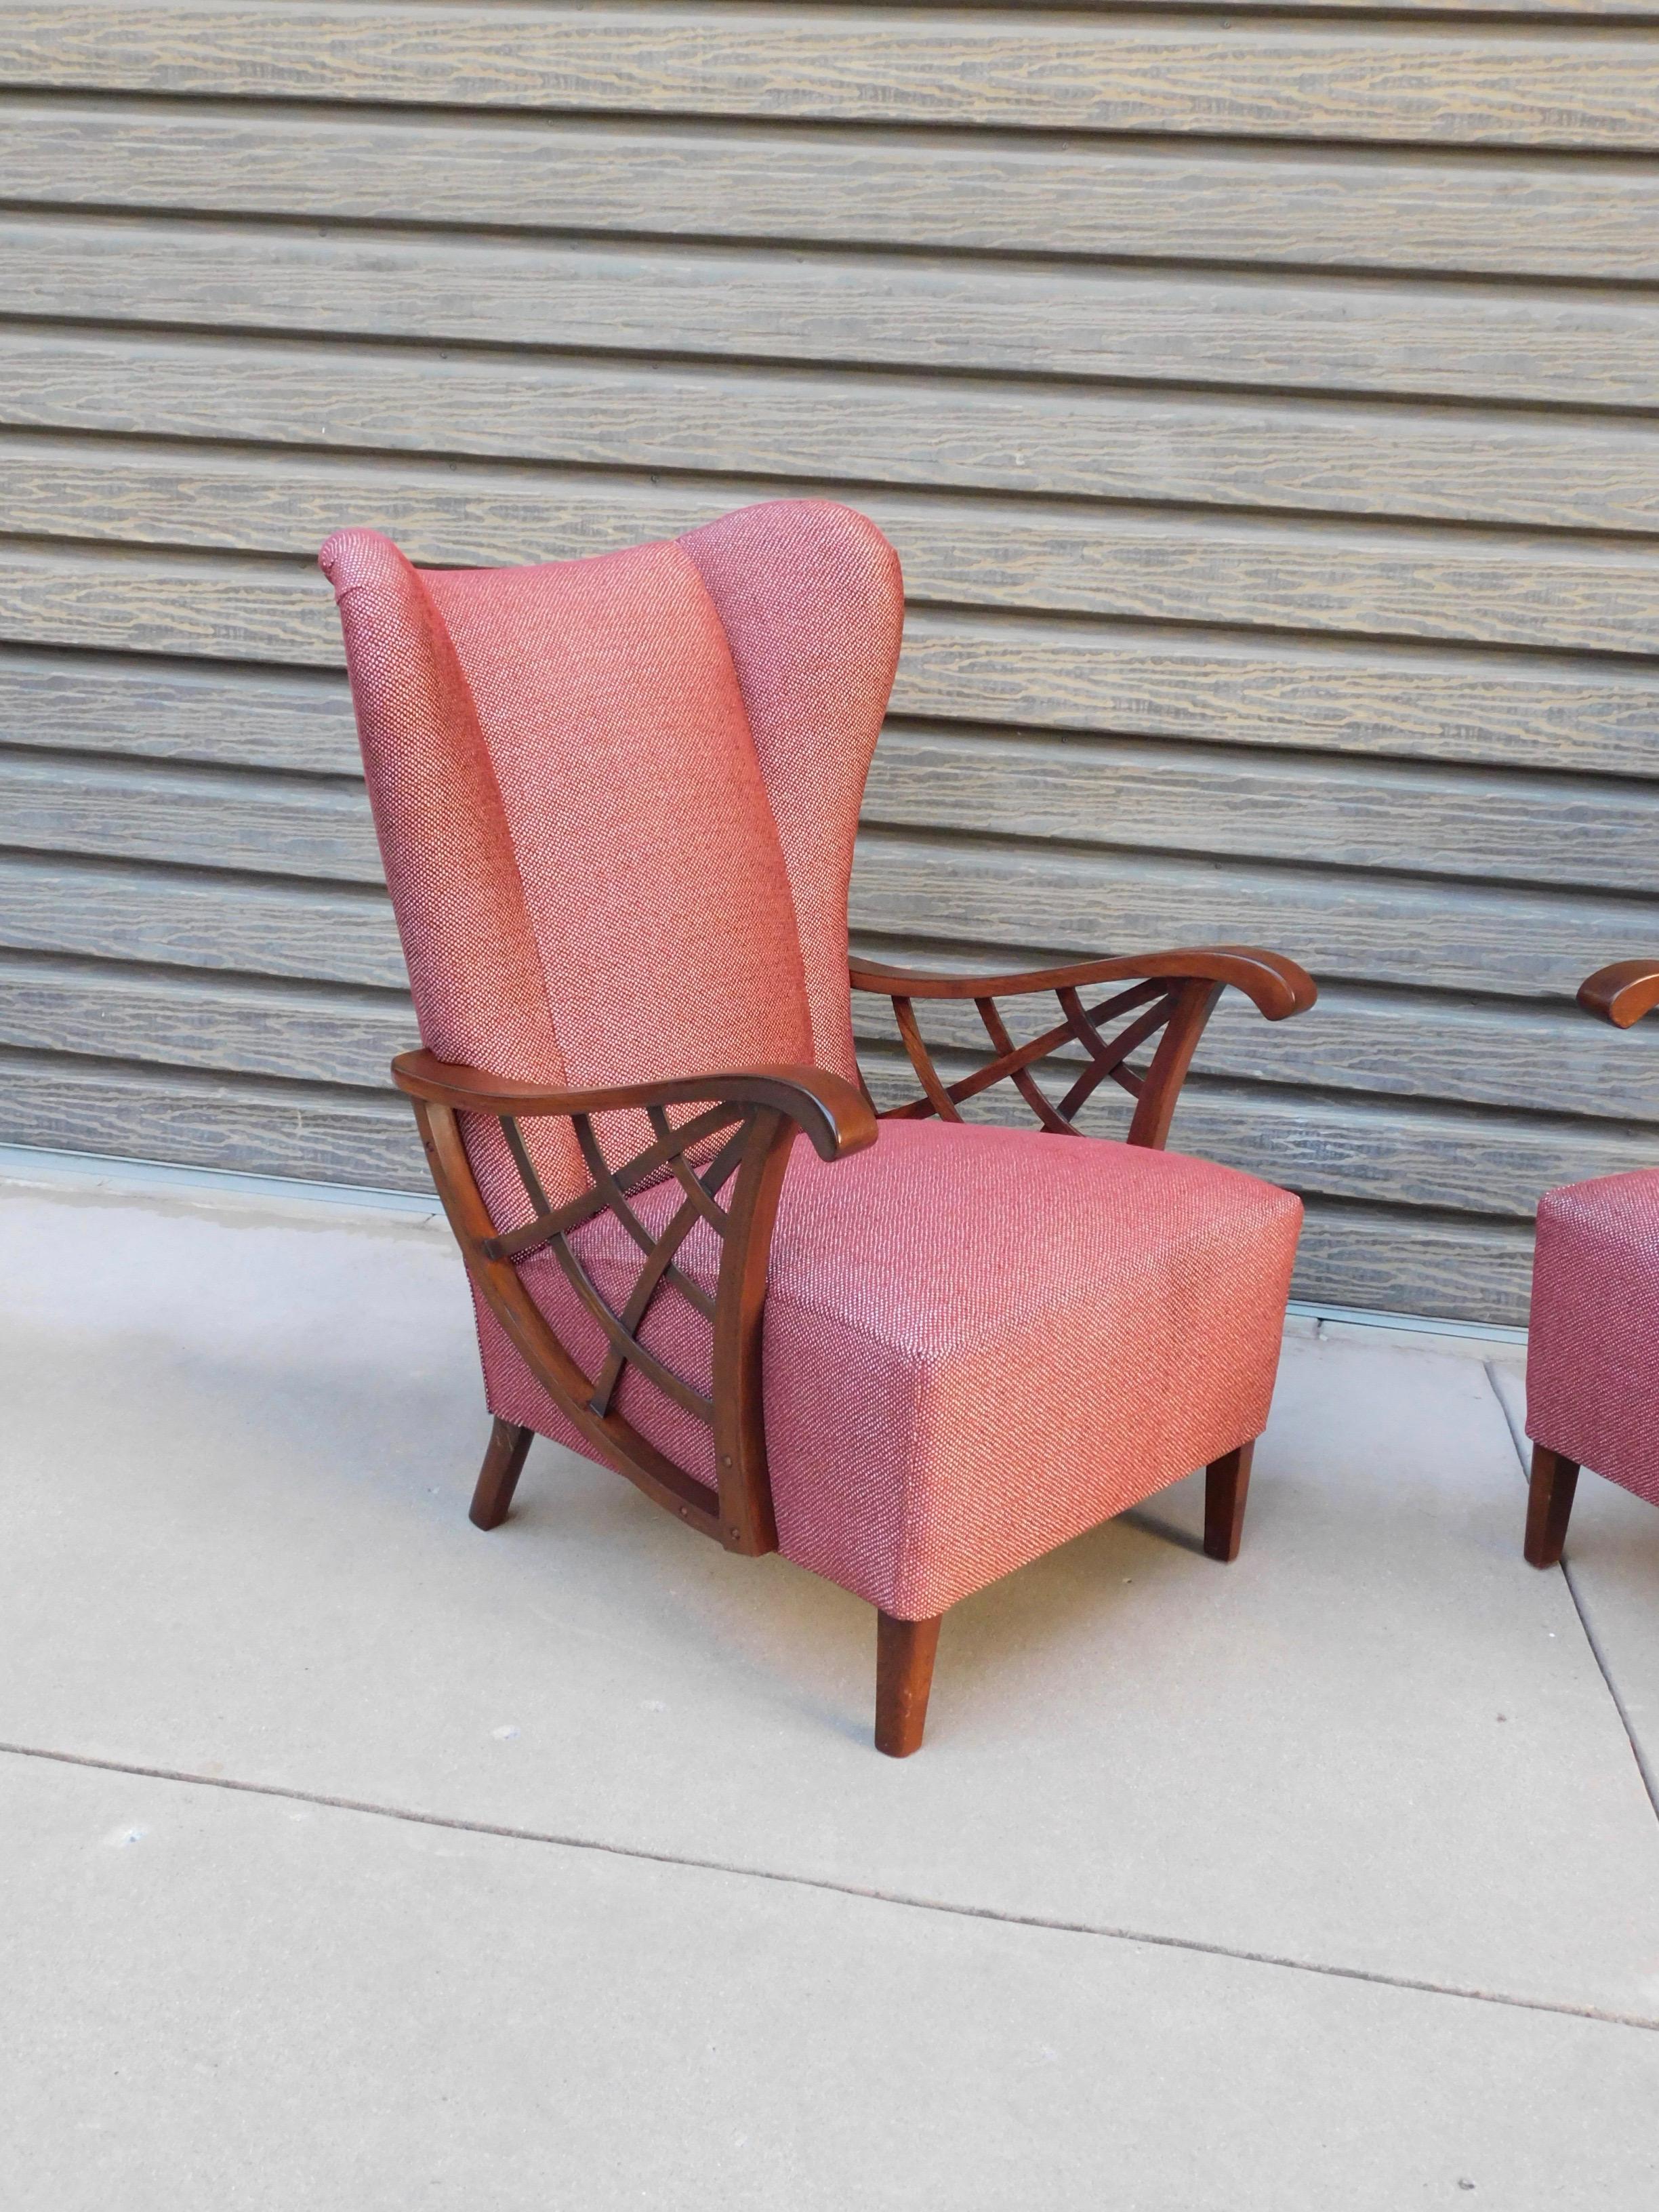 Mid-20th Century Pair of Swedish Modernist Winged Back Spider Web Armchairs, circa 1940 For Sale